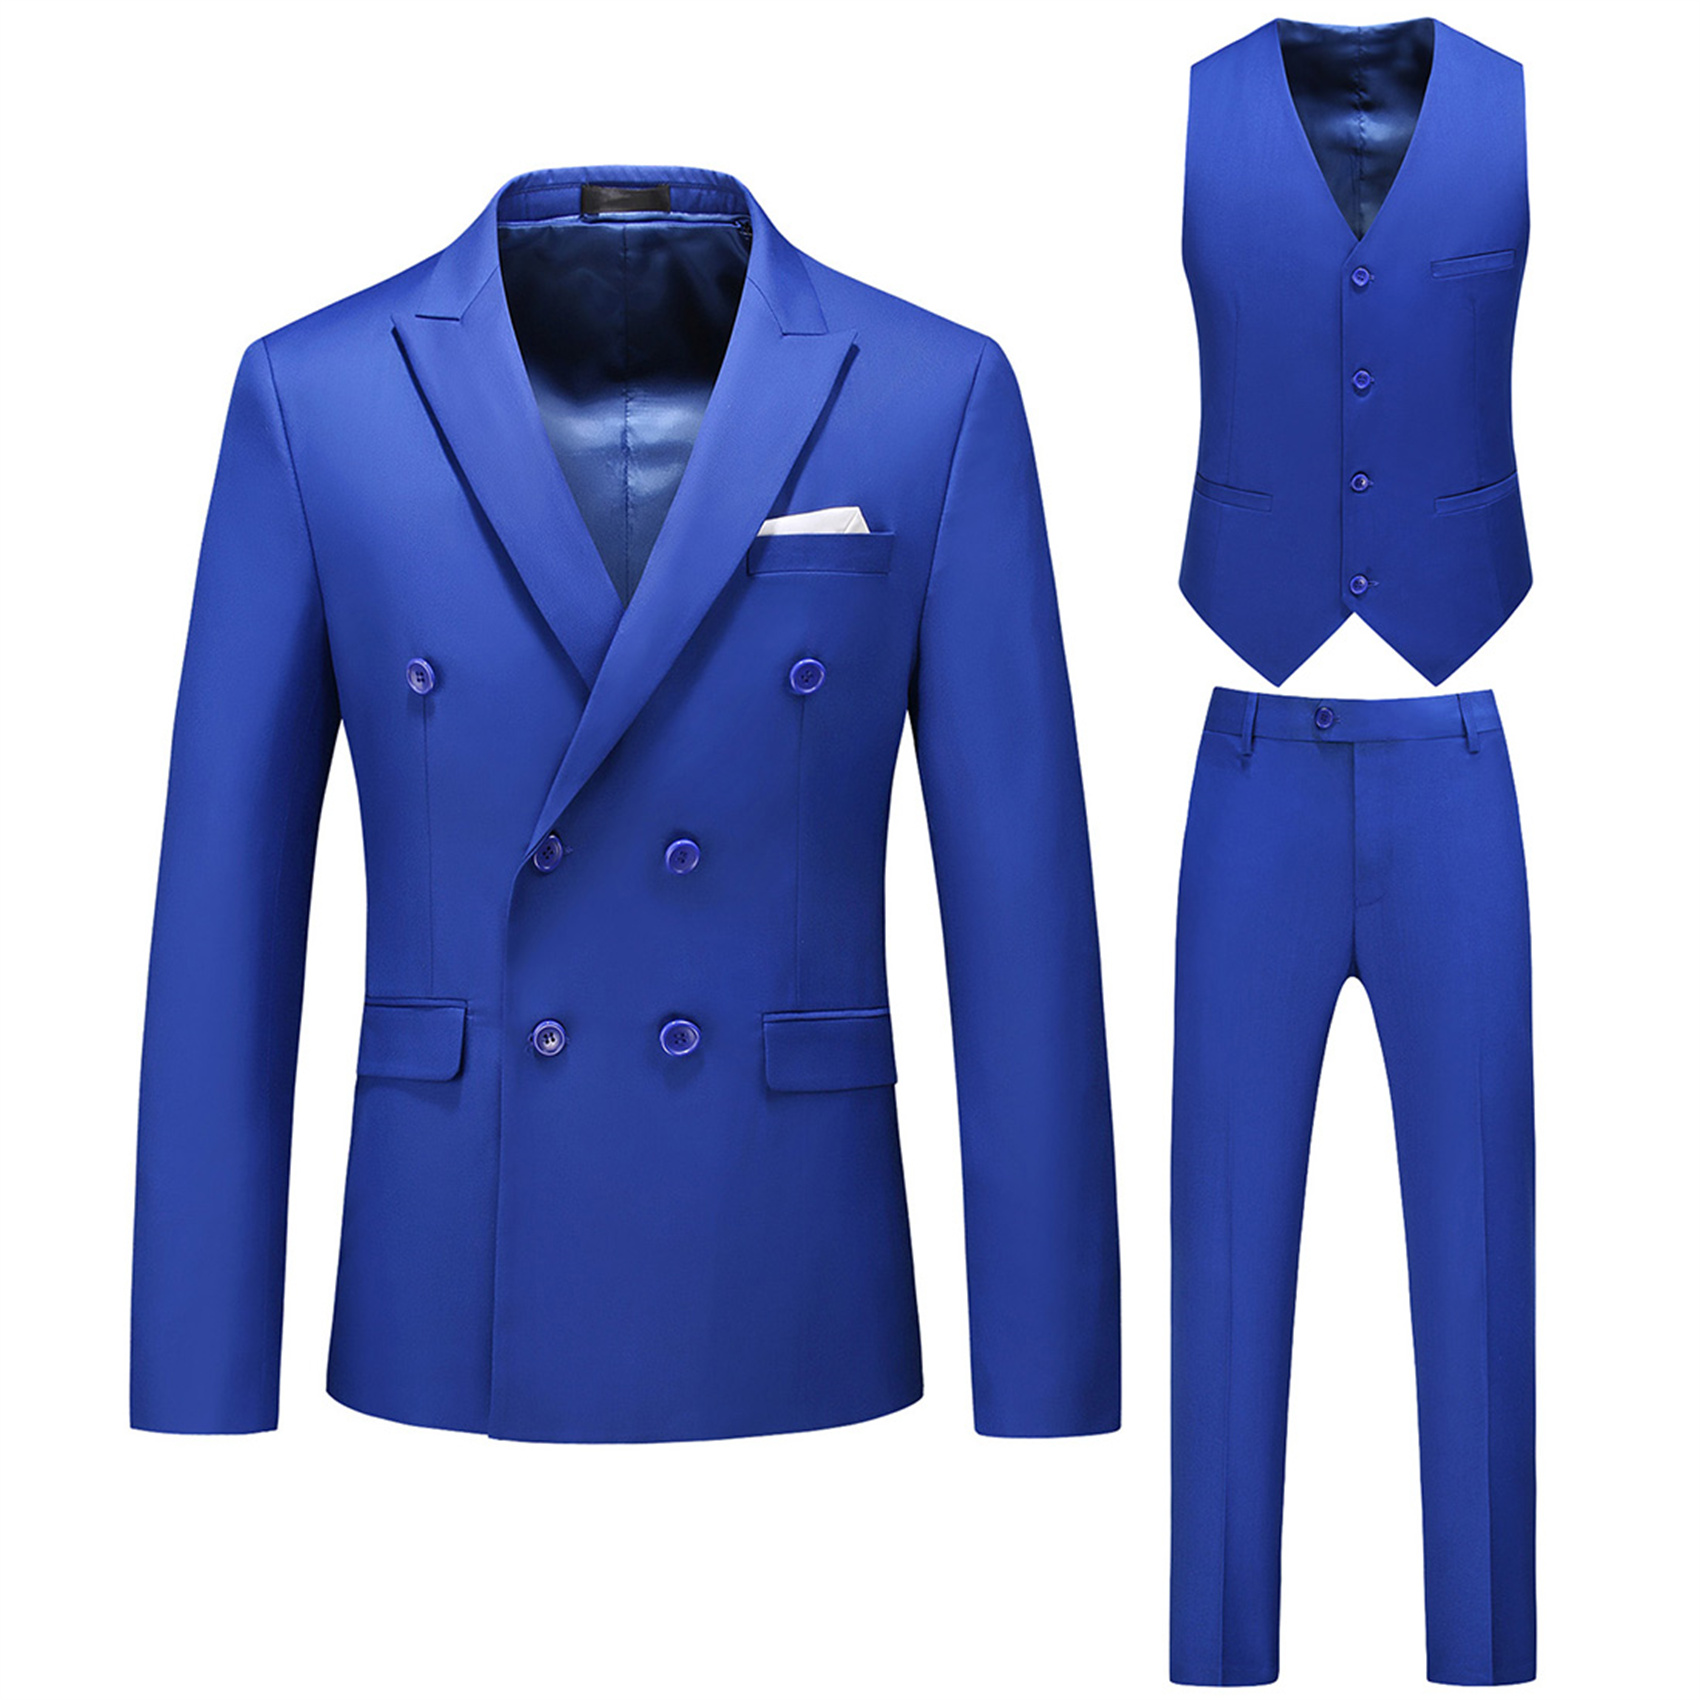 3 Piece Double Breasted Suit for Men, Slim Fit, Royal Blue